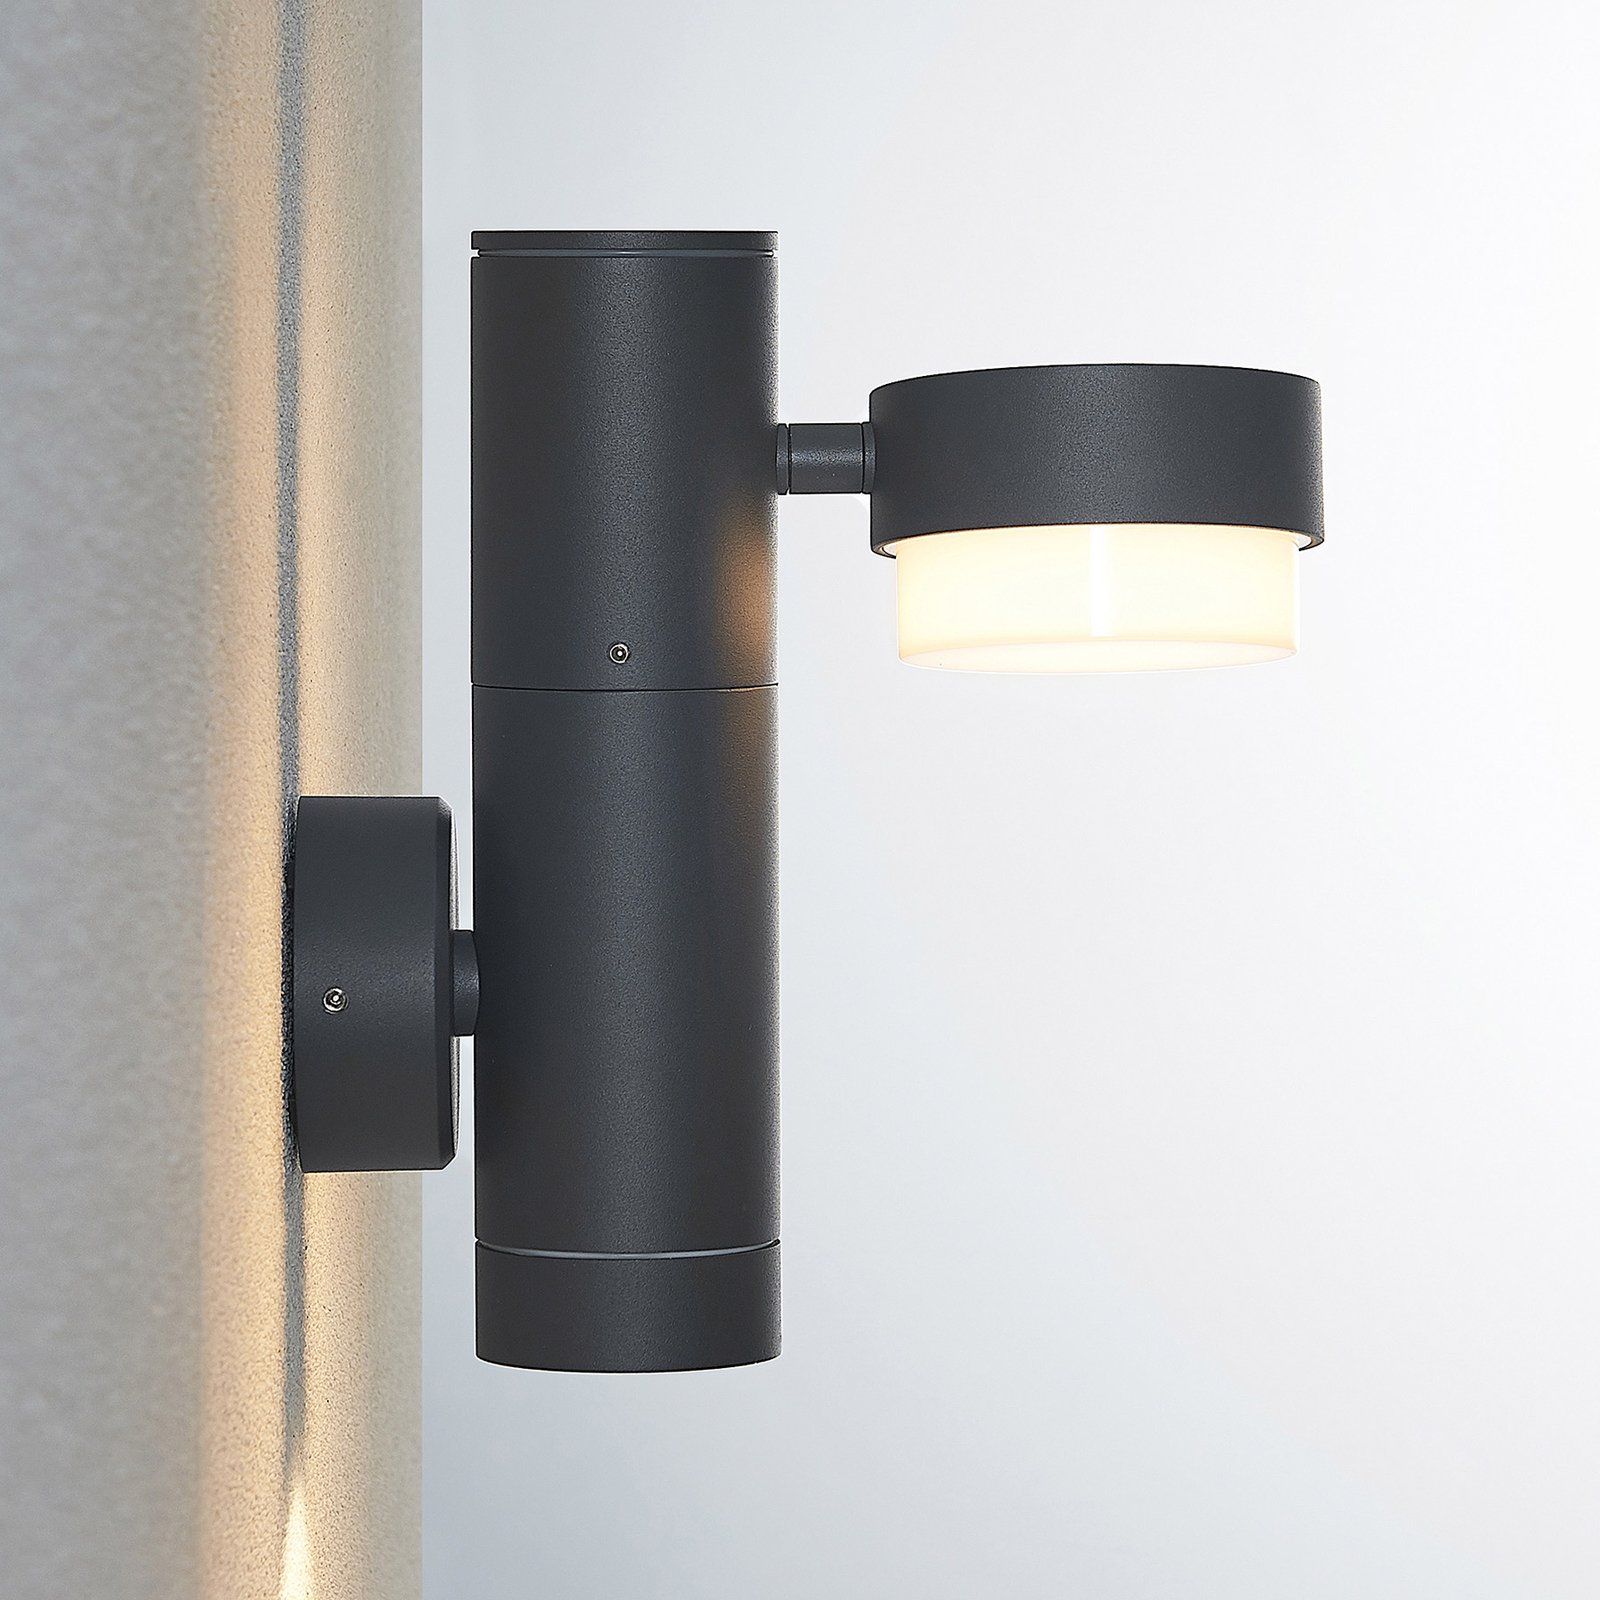 Lucande Marvella outdoor wall light, two-bulb